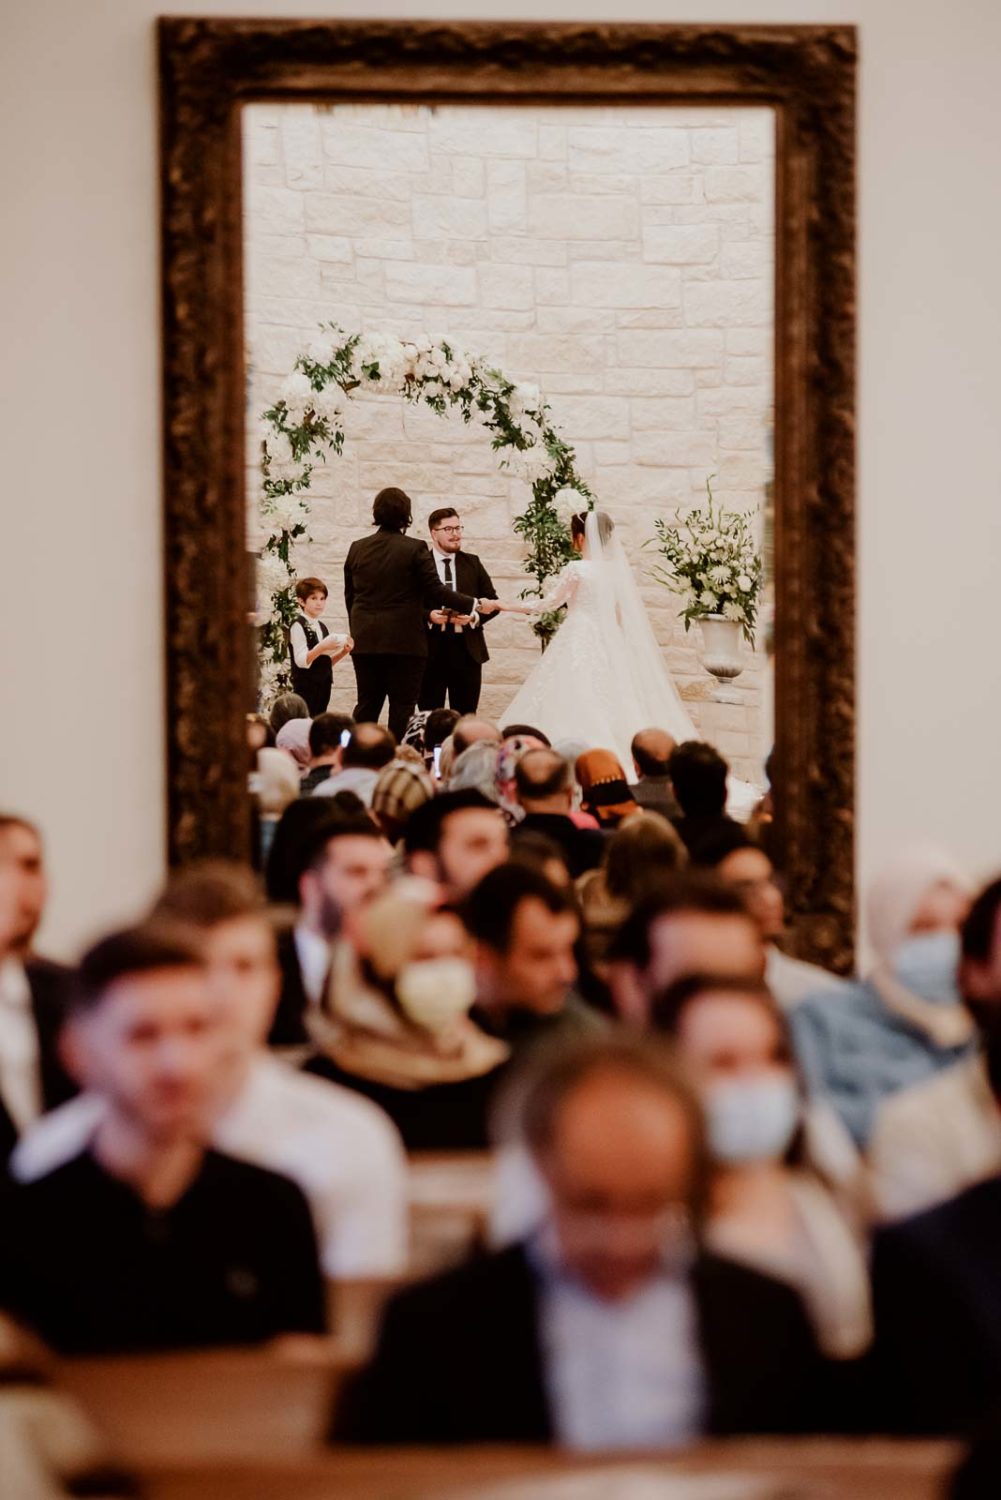 A unique perspective of the ceremony in the long lens photograph reflection of the mirror in the back of the room new